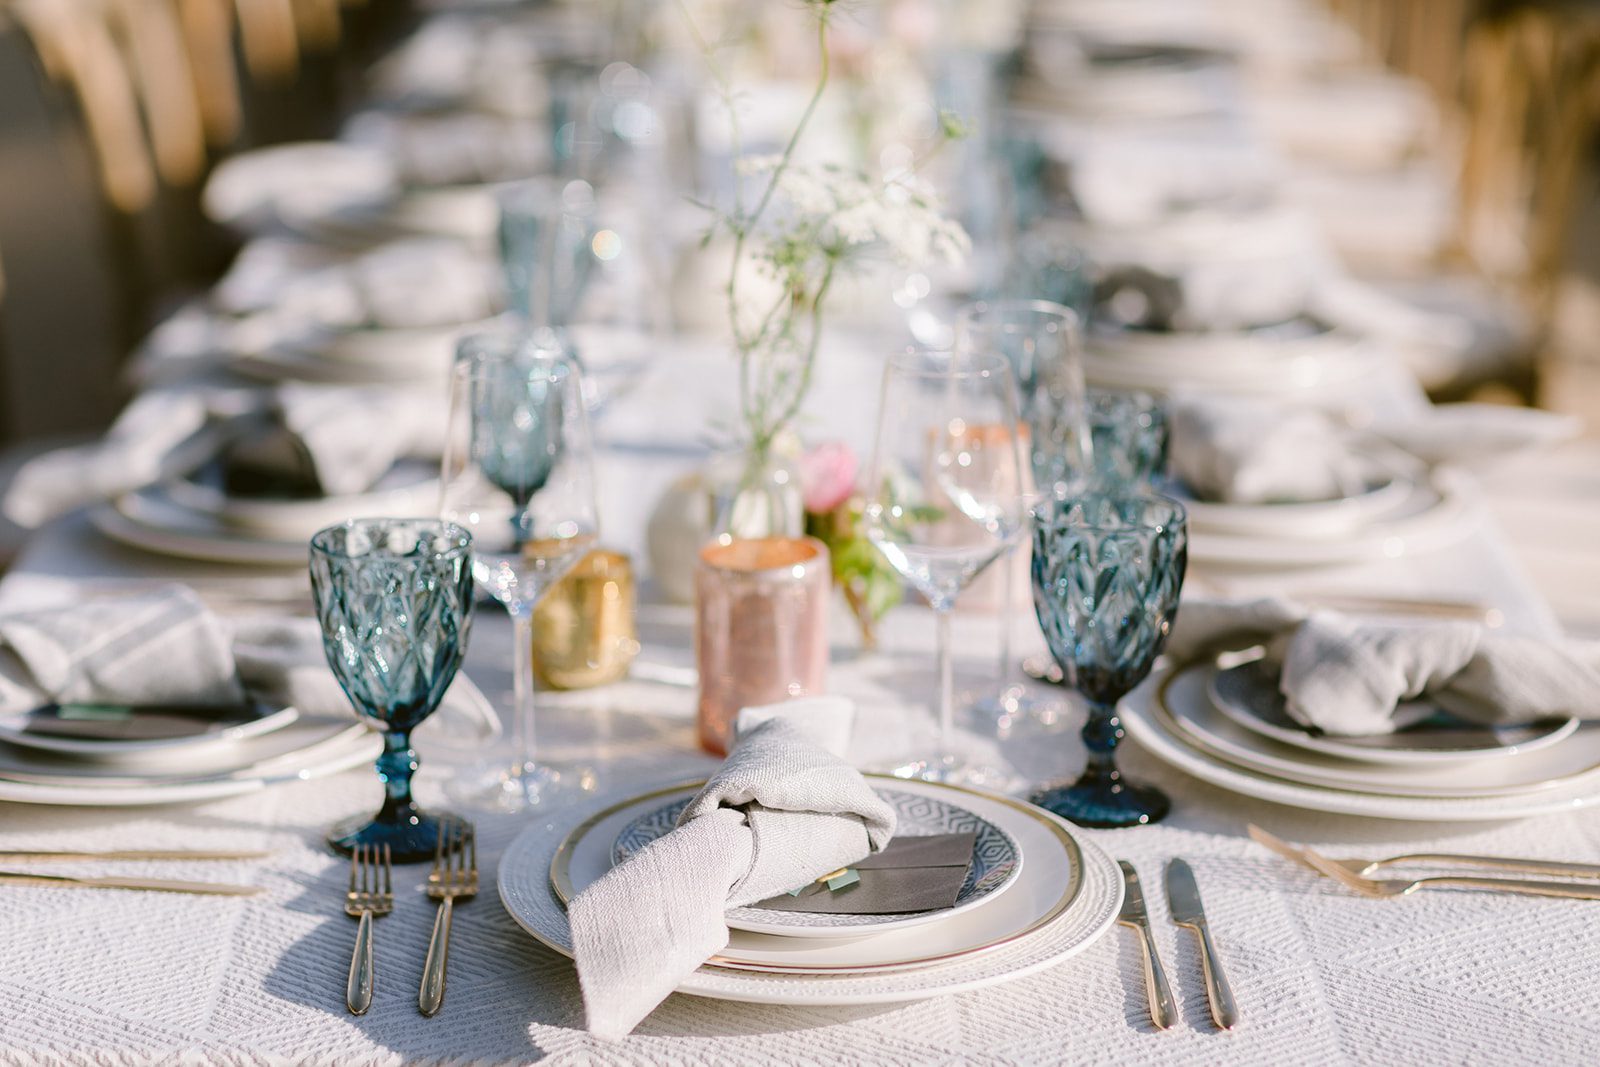 A table setting with blue and white plates and silverware.